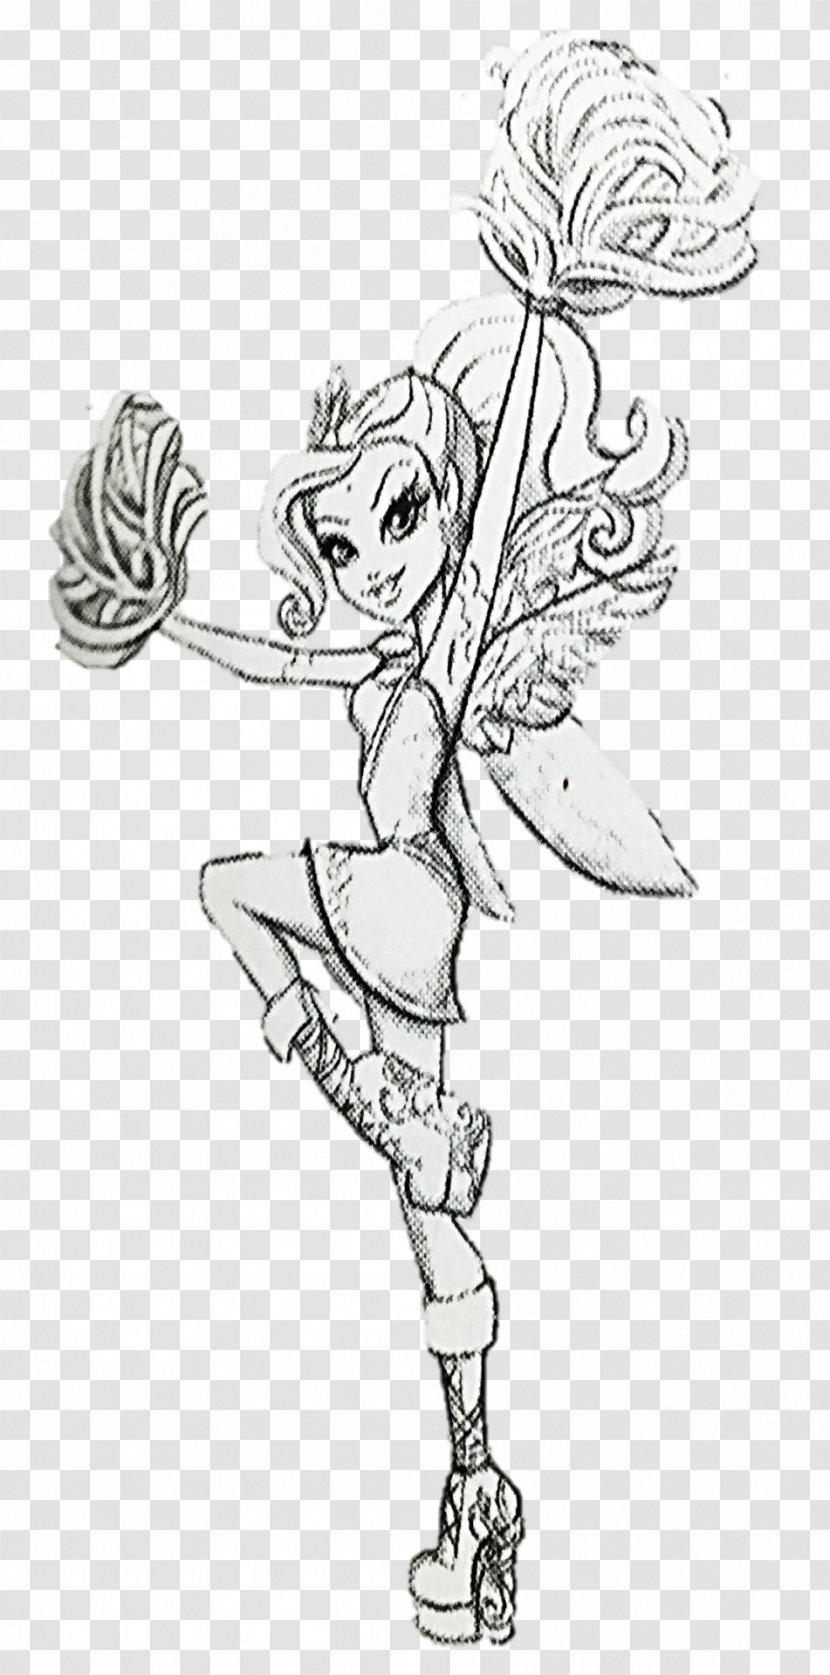 Ever After High Rapunzel Cheshire Cat Fairy Godmother Sketch - Tree - Sleeping Beauty Transparent PNG